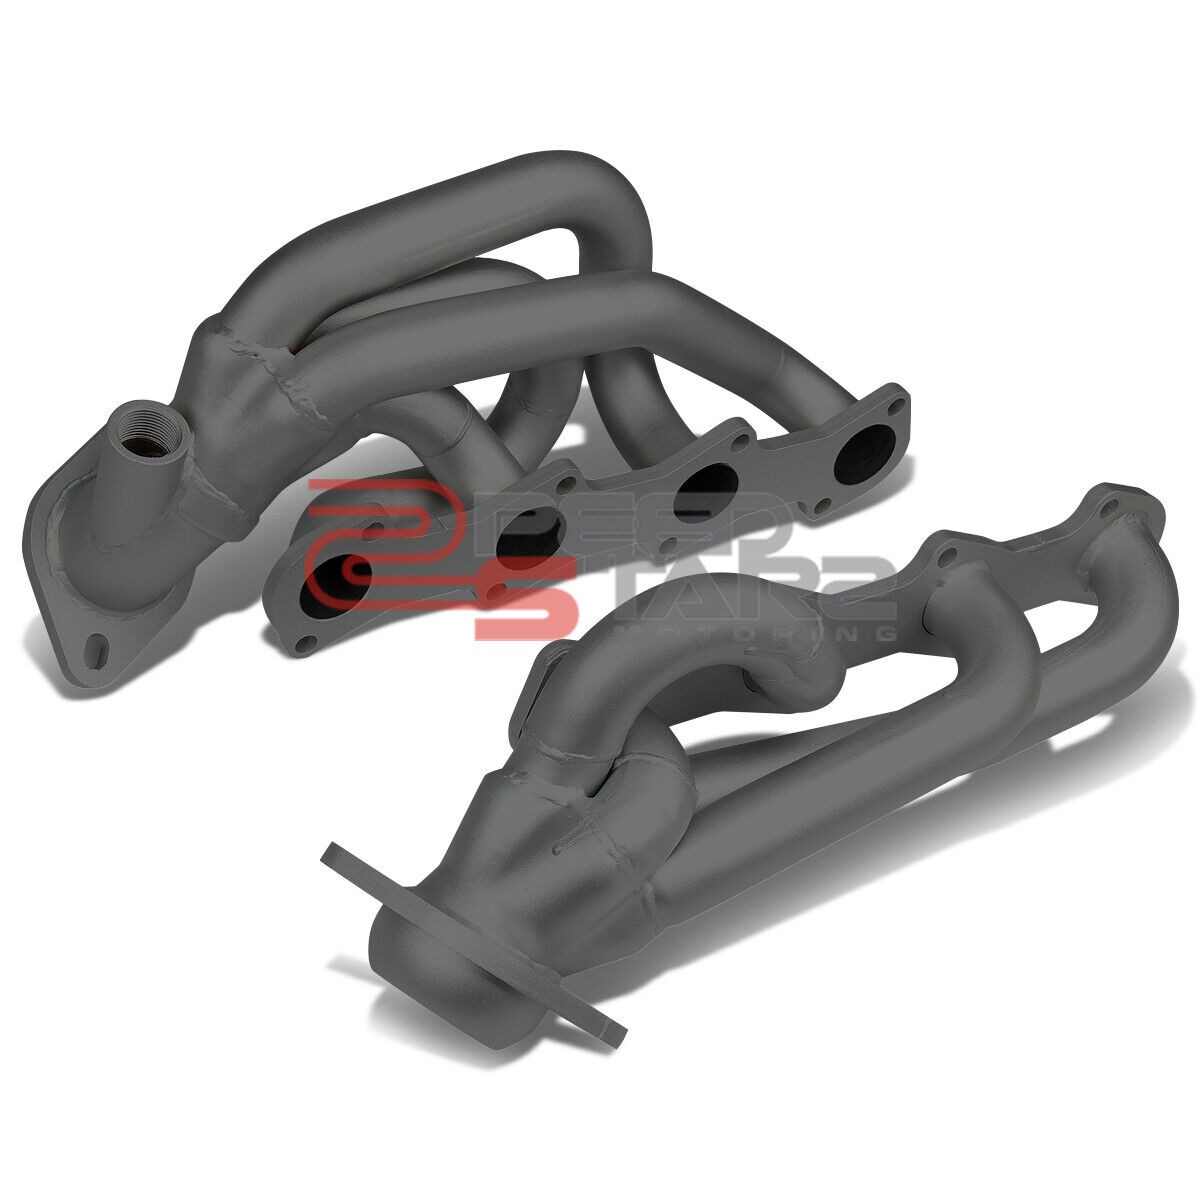 FOR F150/F250/EXPEDITION 5.4L STAINLESS BLACK PERFORMANCE RACING/HEADER/EXHAUST